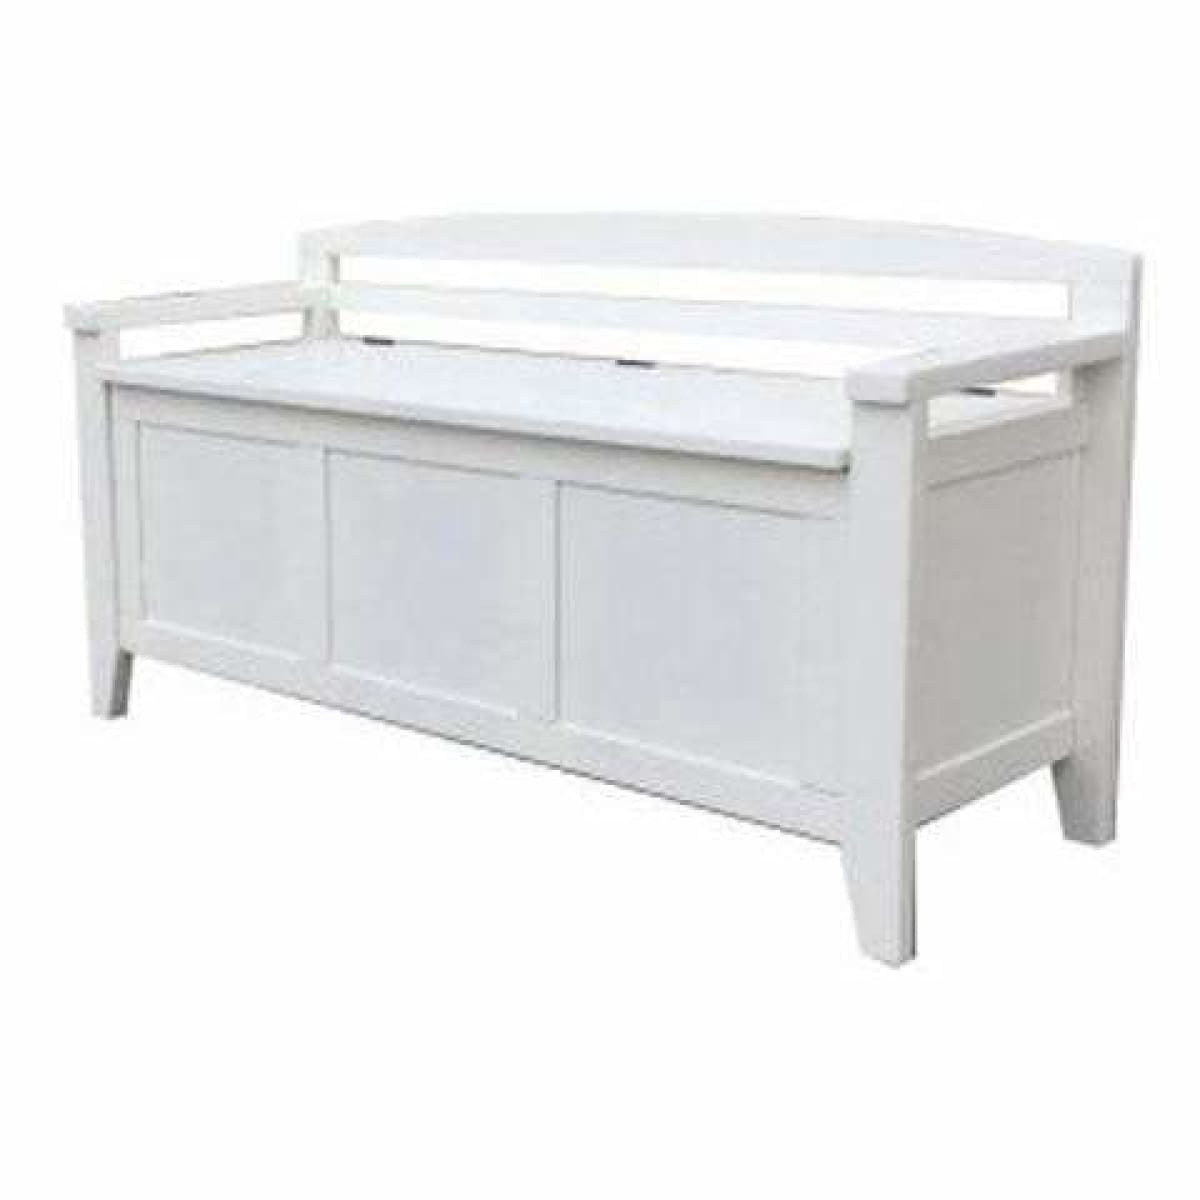 Charvanna Accent Storage Bench - Long Bench